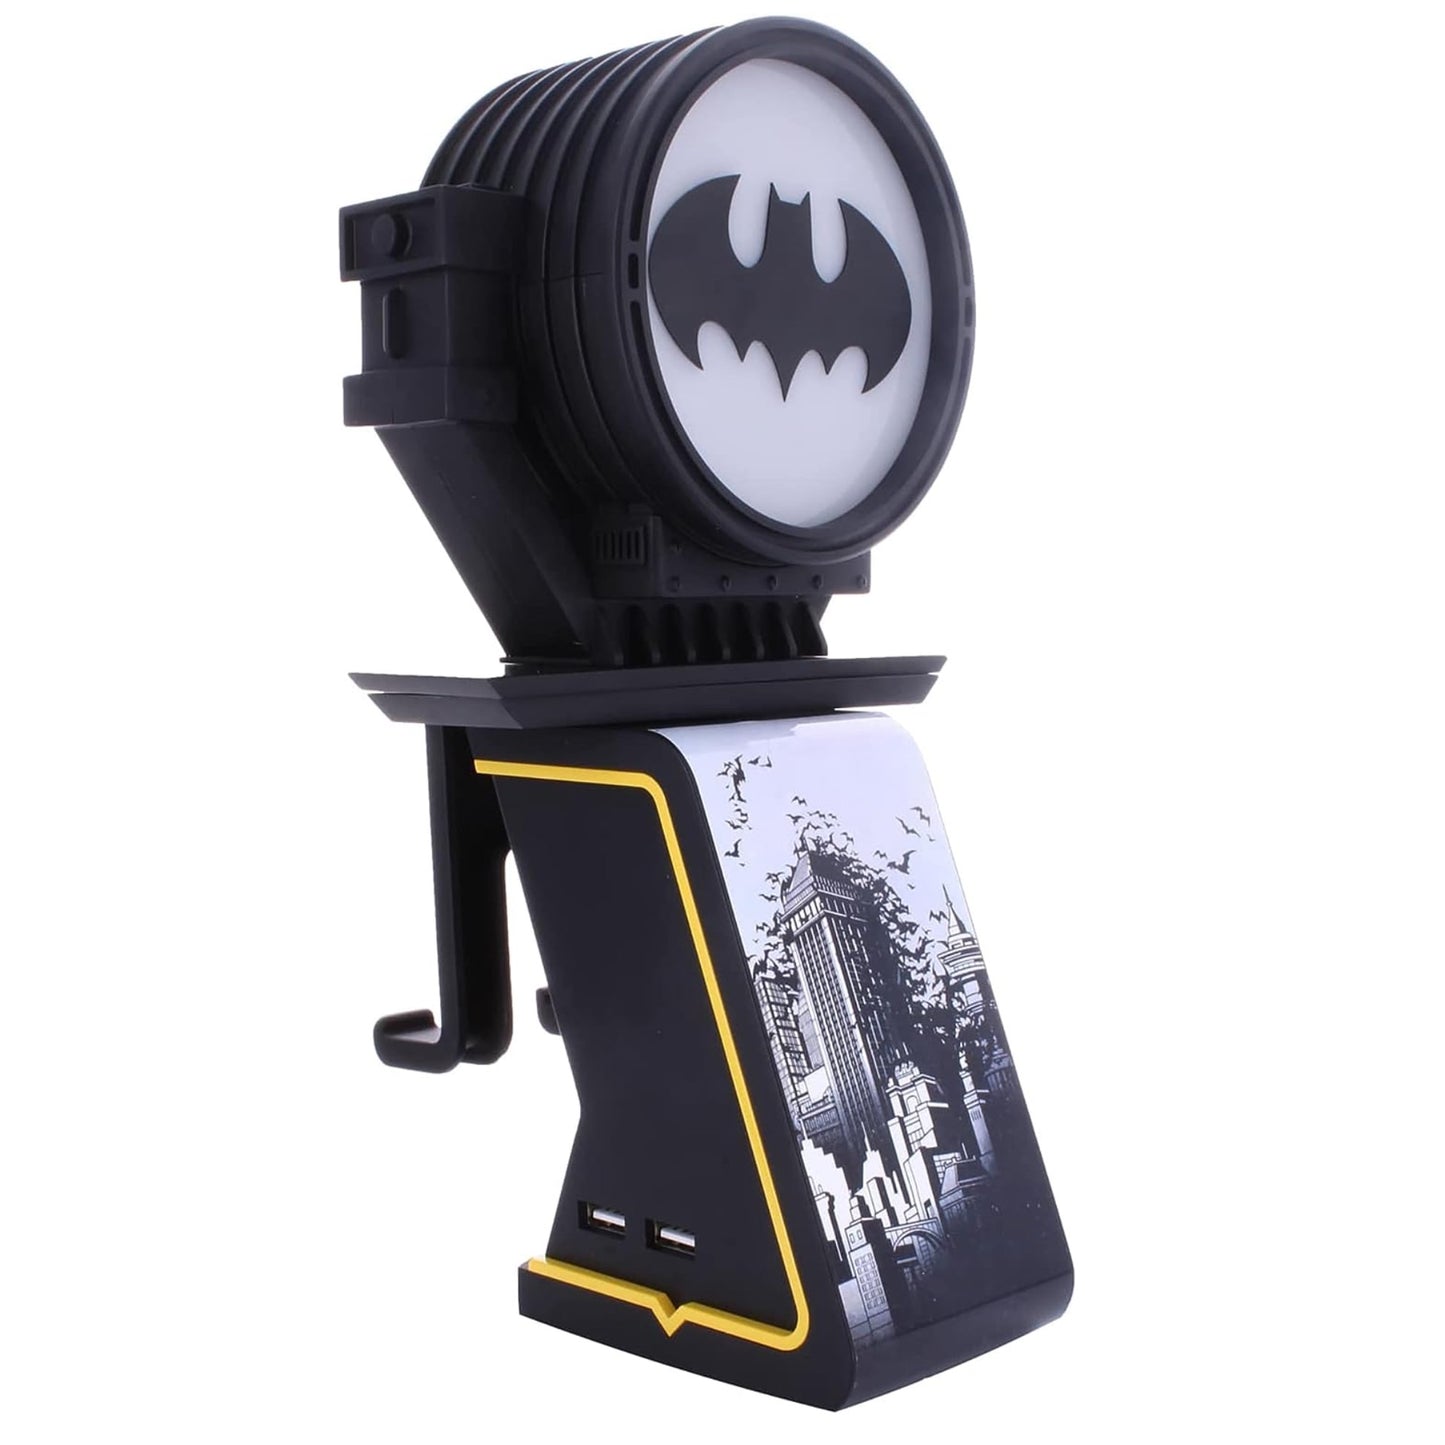 Cable Guys Warner Bros: Batman Cable Guys Light Up Ikon Controller/Device Holder